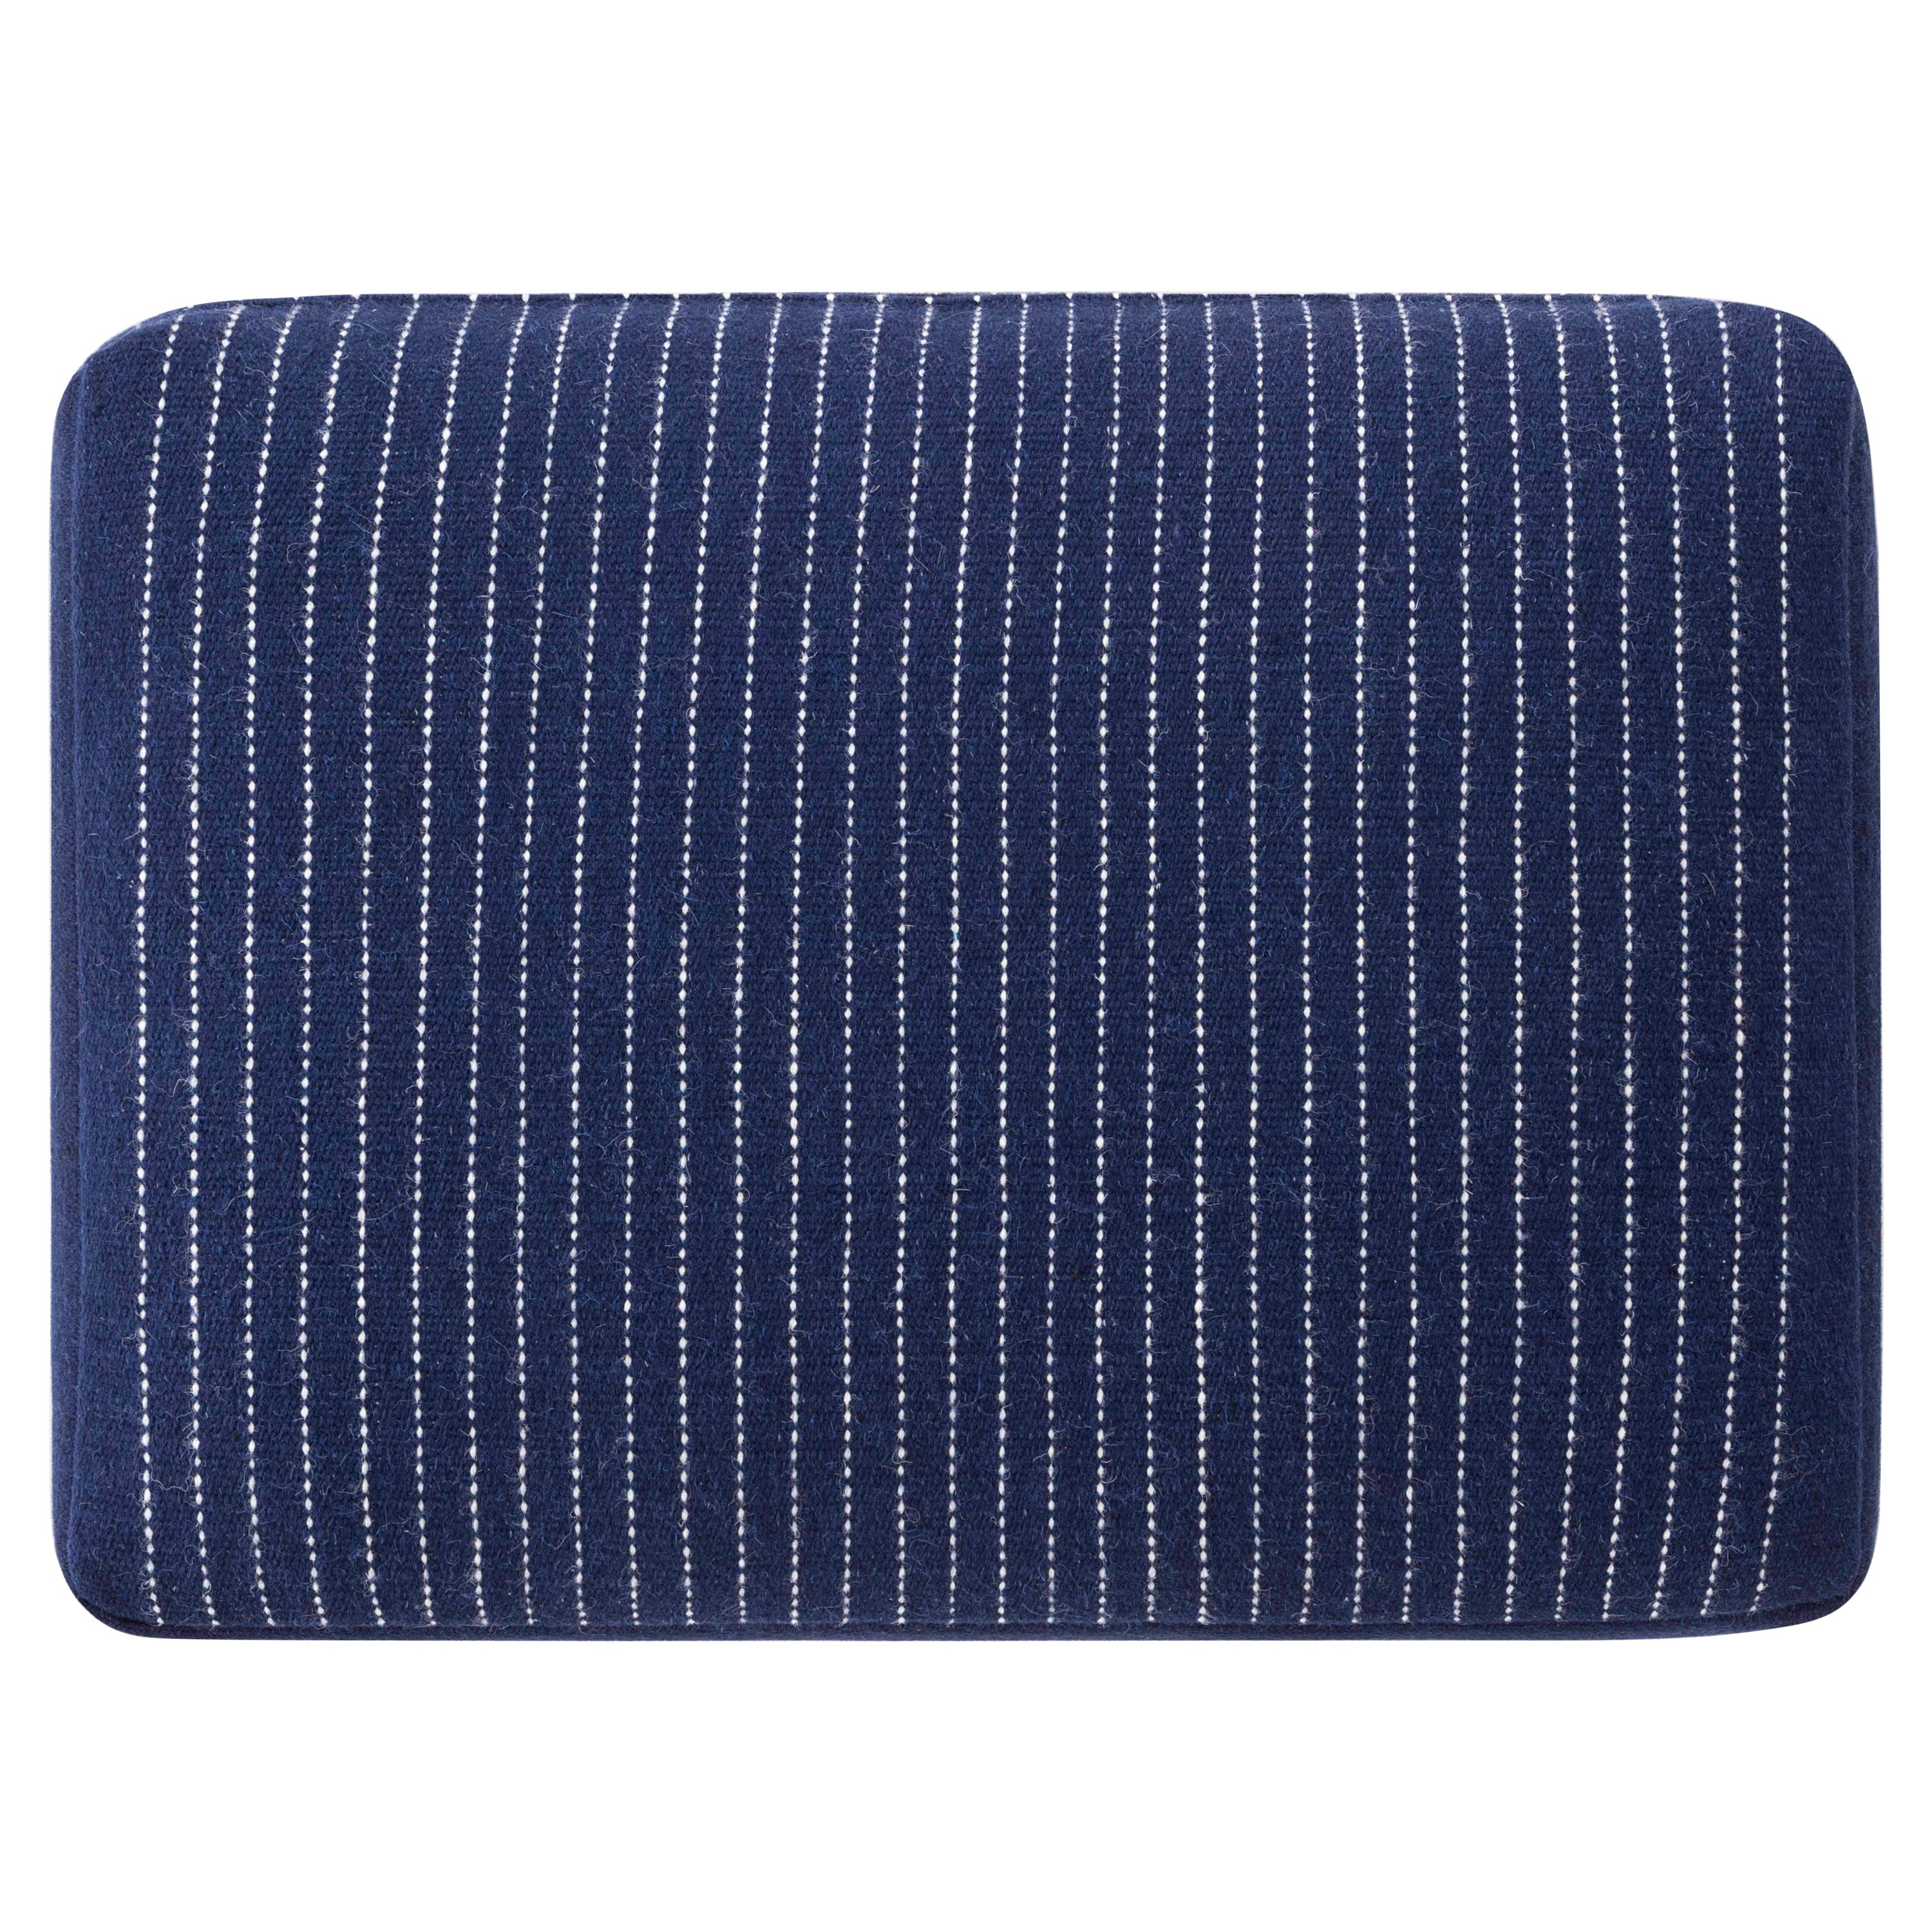 GAN Spaces Lan Large Cushion with Wool in Indigo by Neri&Hu For Sale